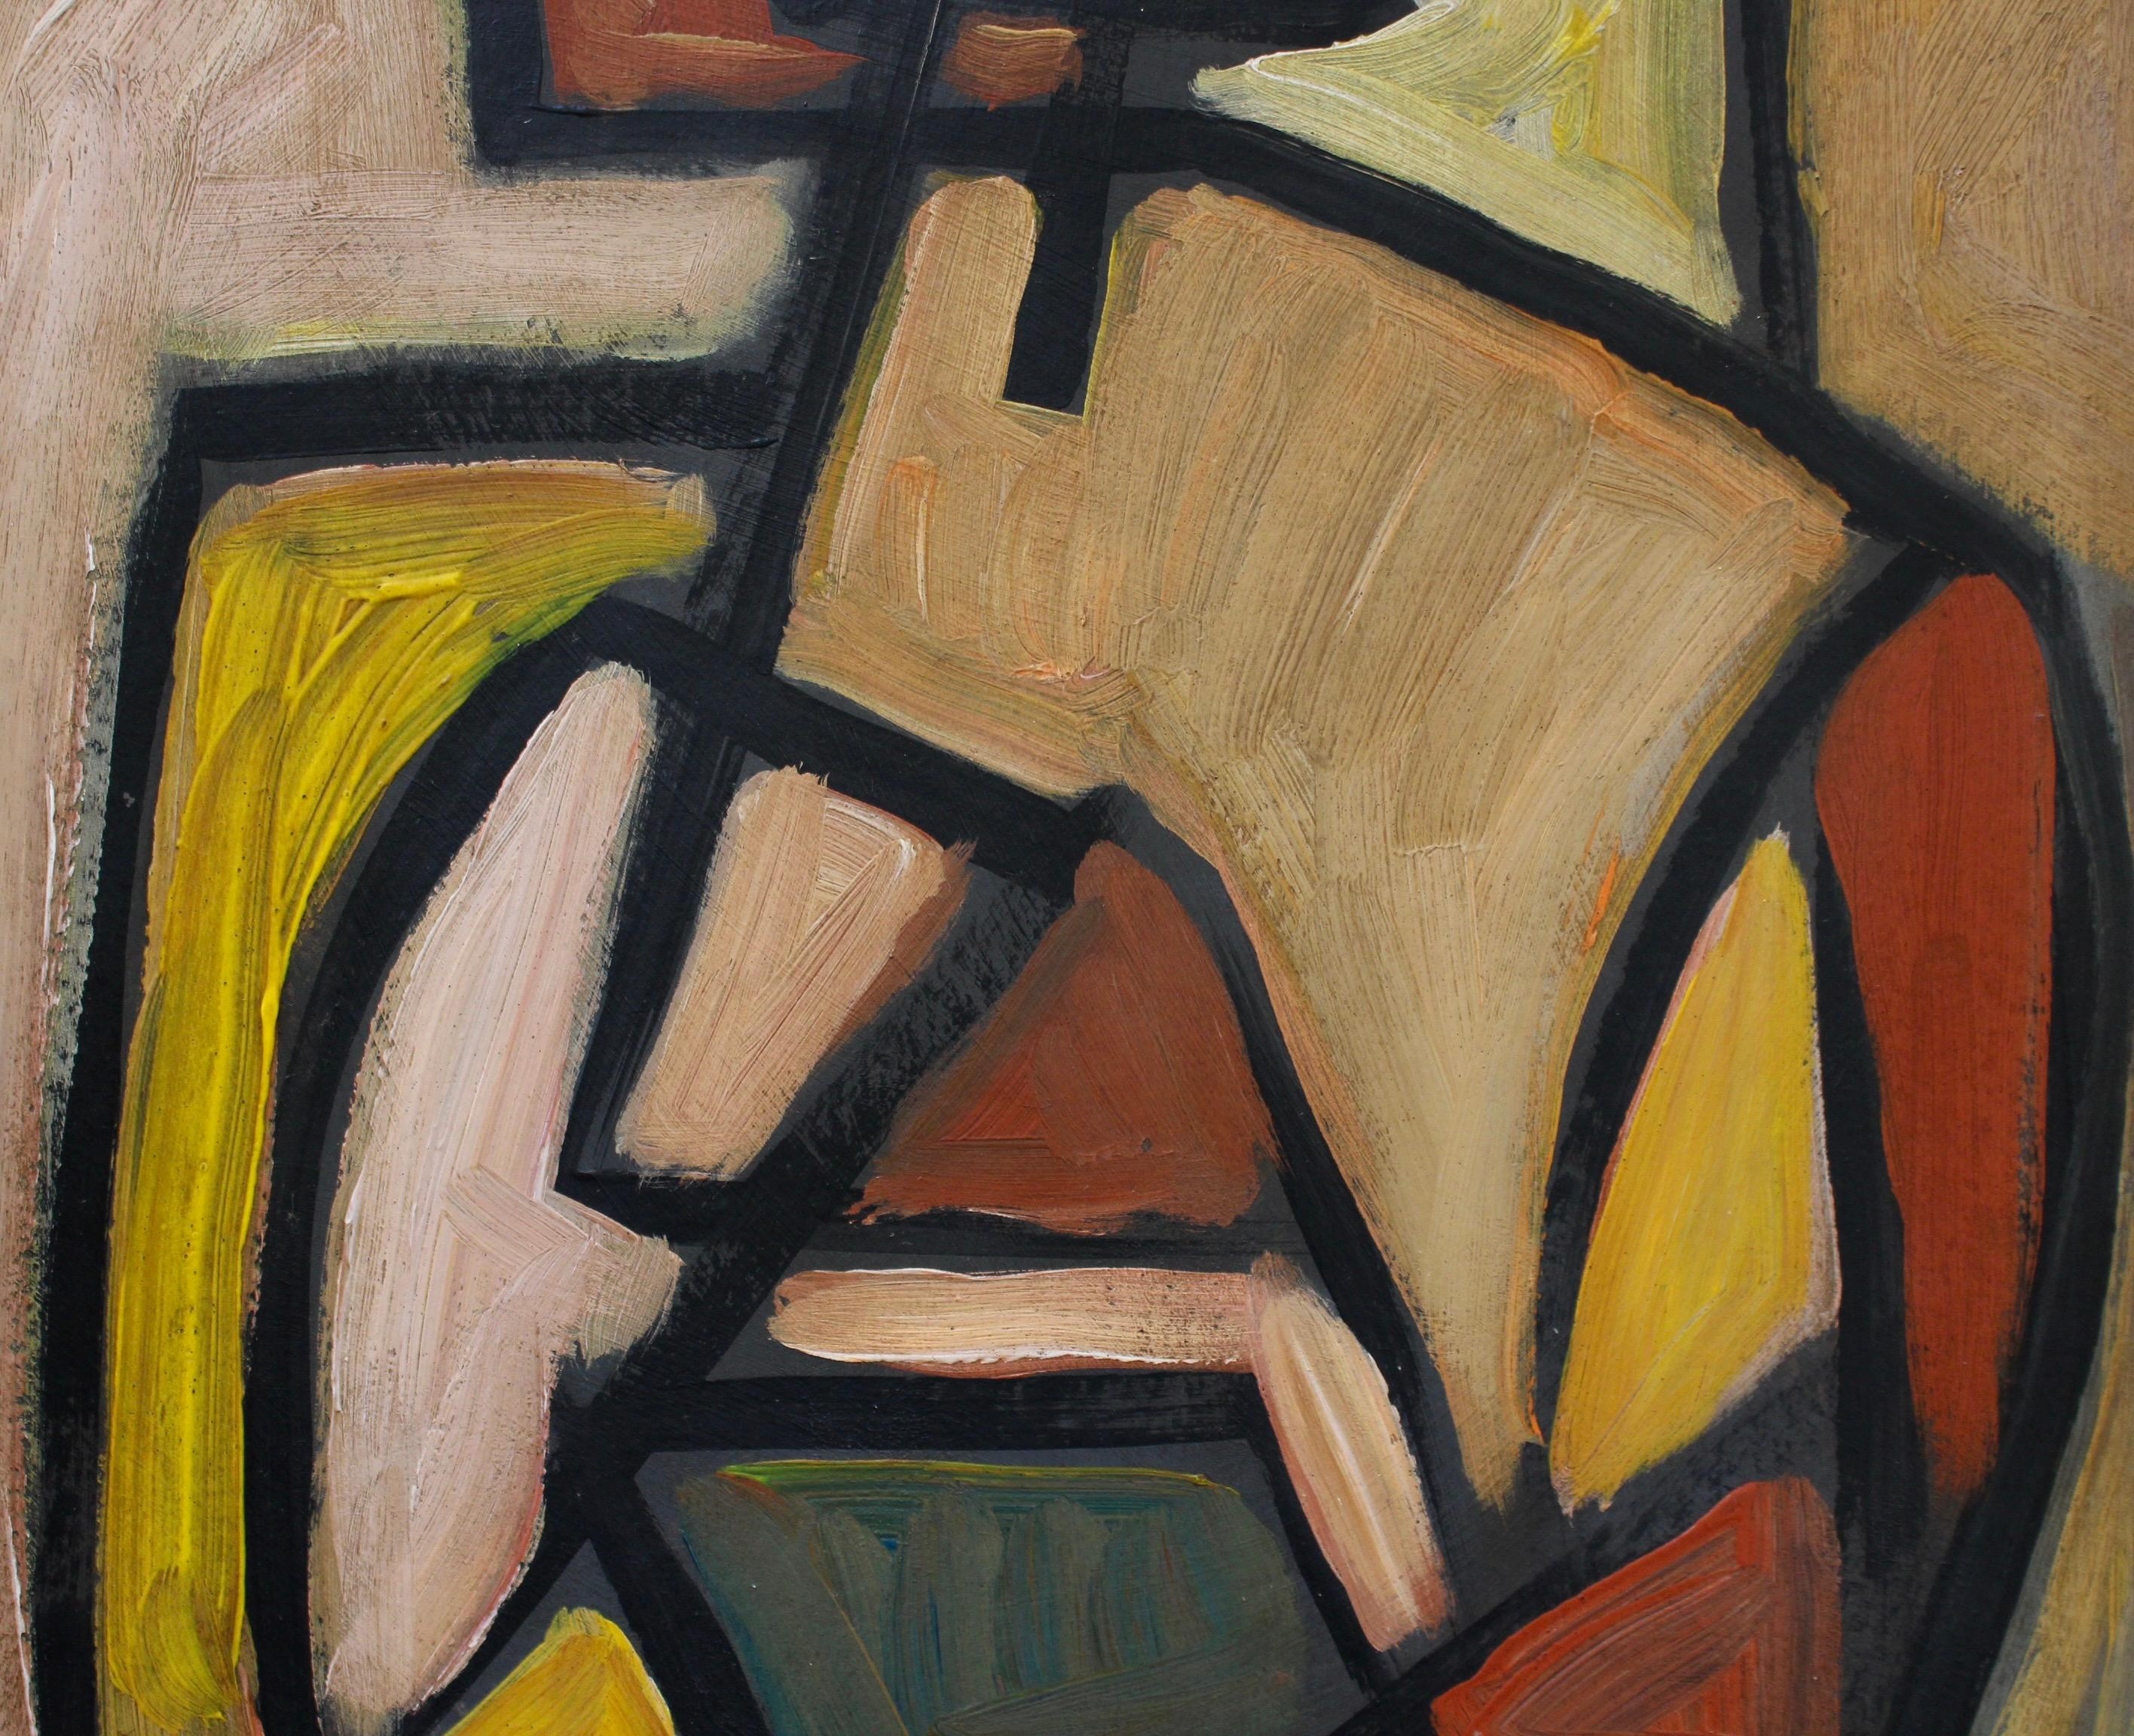 'Figure in the Mirror', oil on board, by STM (circa 1970s). An imposing Modern painting by an artist with the initials STM. Clearly inspired by Picasso and the cubists, this artist used angles, lines and vibrant colours to create an entirely new